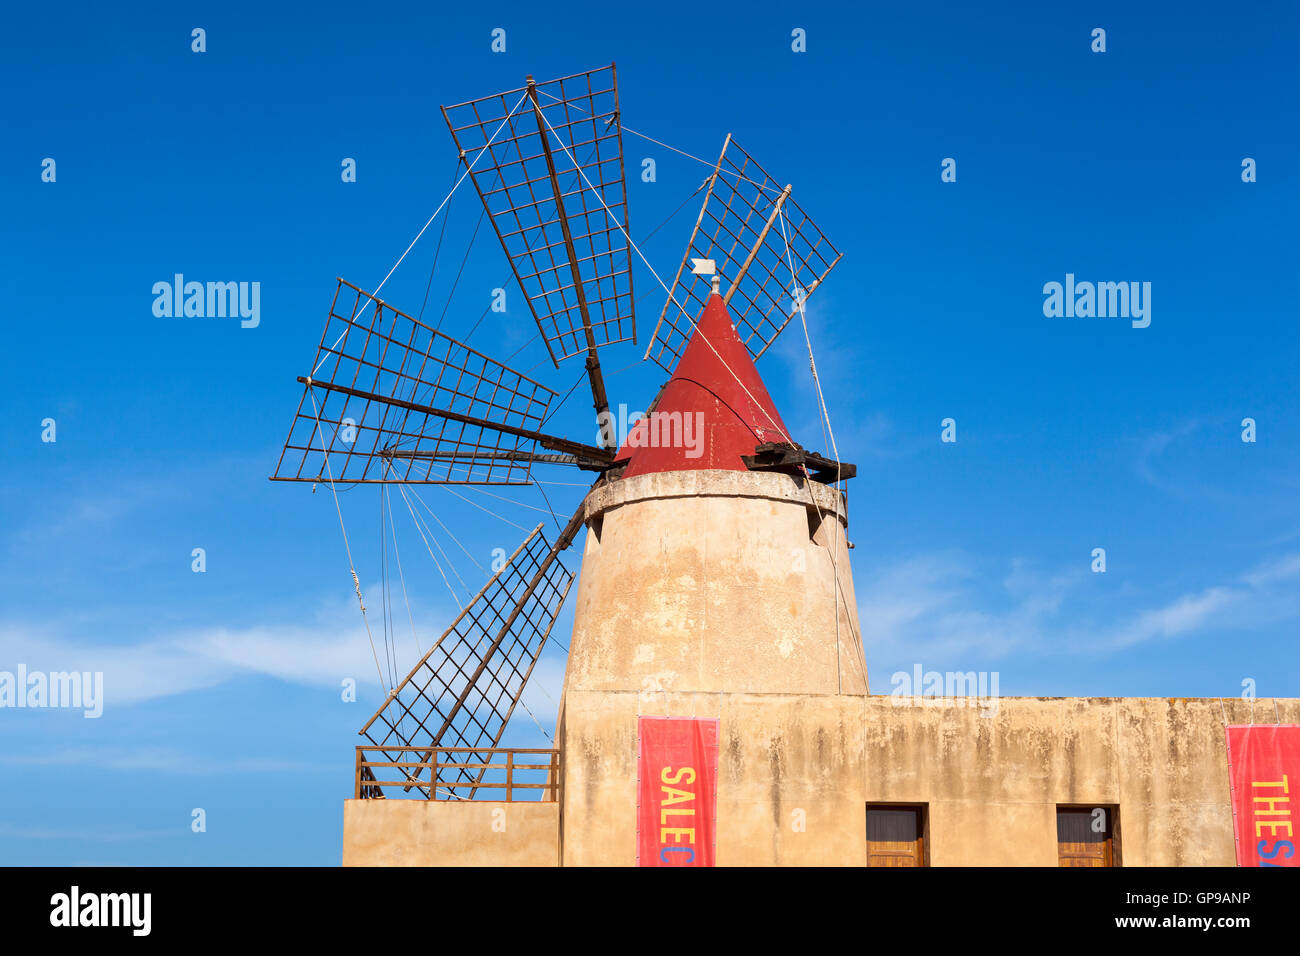 Salt Museum windmill at Stagnone salt pans, Stagnone, near Marsala and Trapani, Sicily, Italy Stock Photo